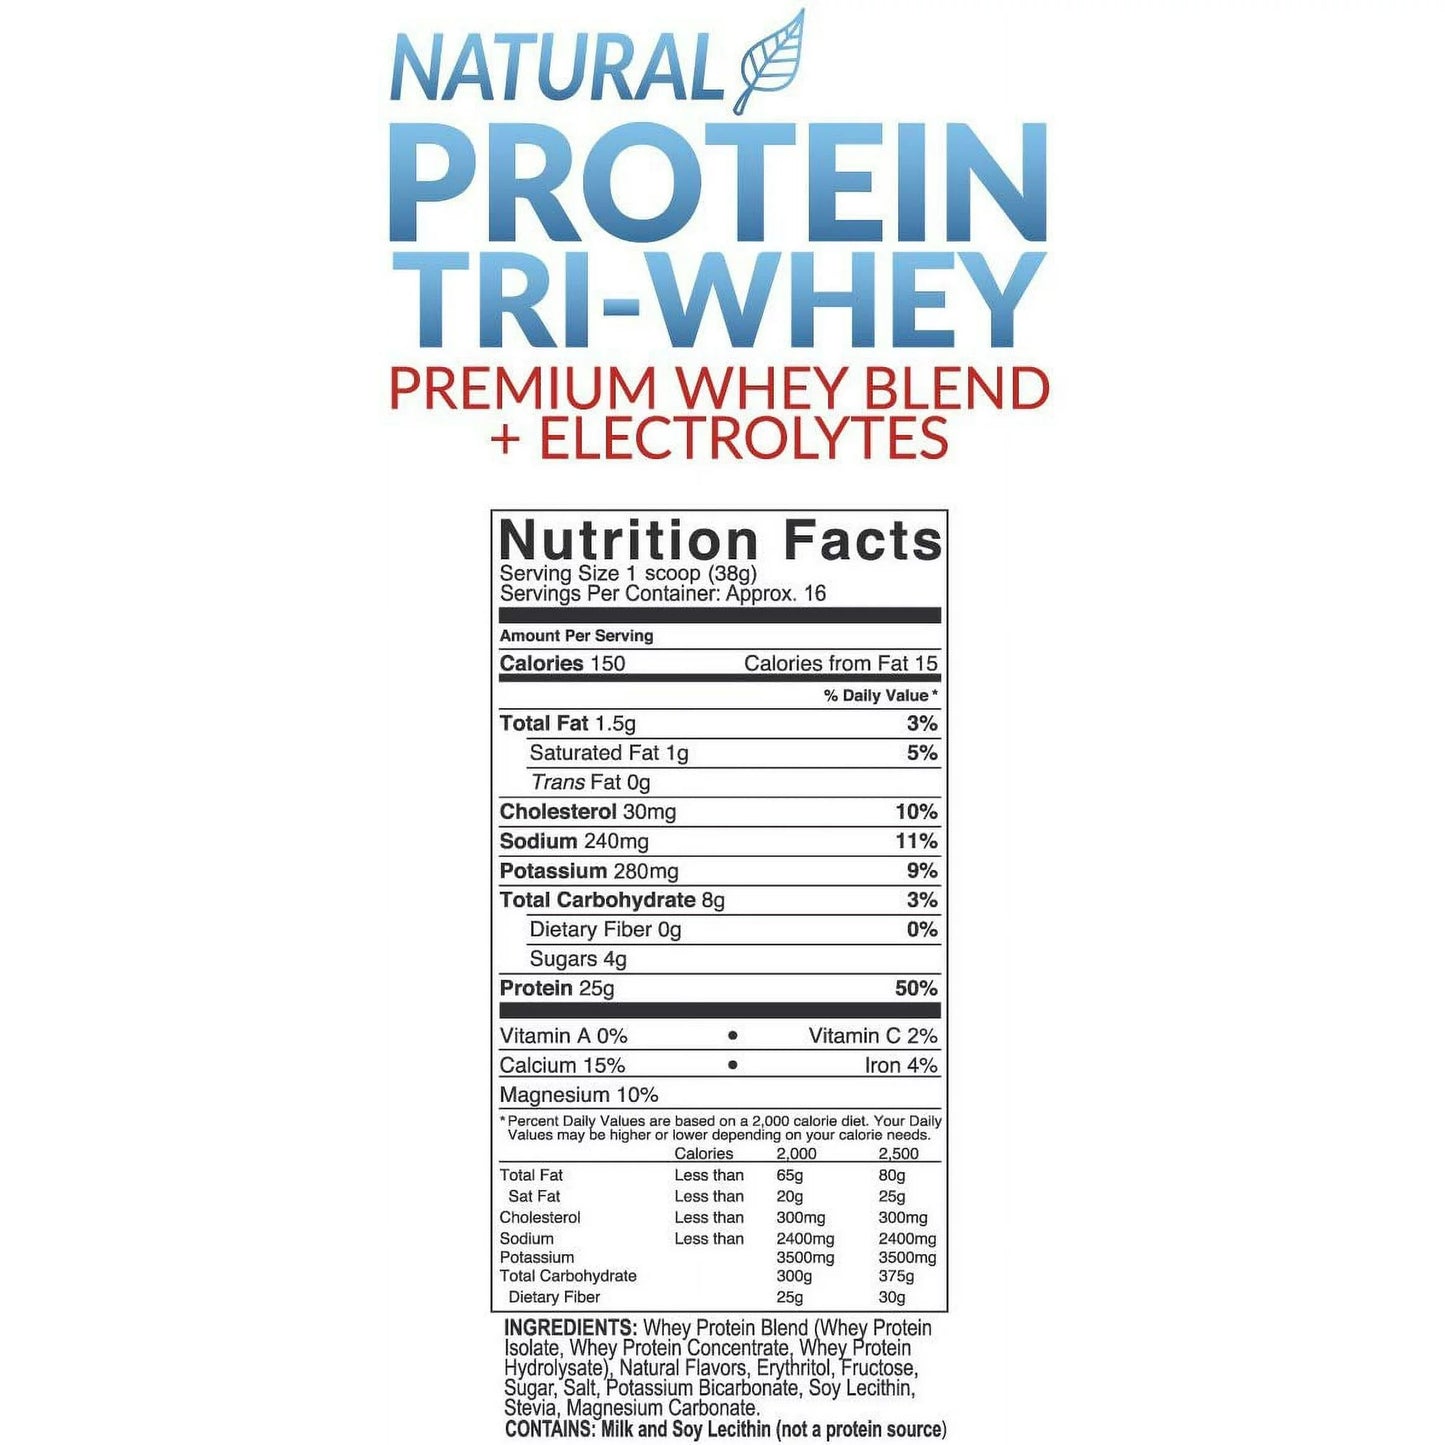 Tri-Whey Blend Protein Powder + Electrolytes, 25g Protein, Gluten Free, 5g BCAA | Hydrate, Recover, Build Muscle, Energize | Vanilla